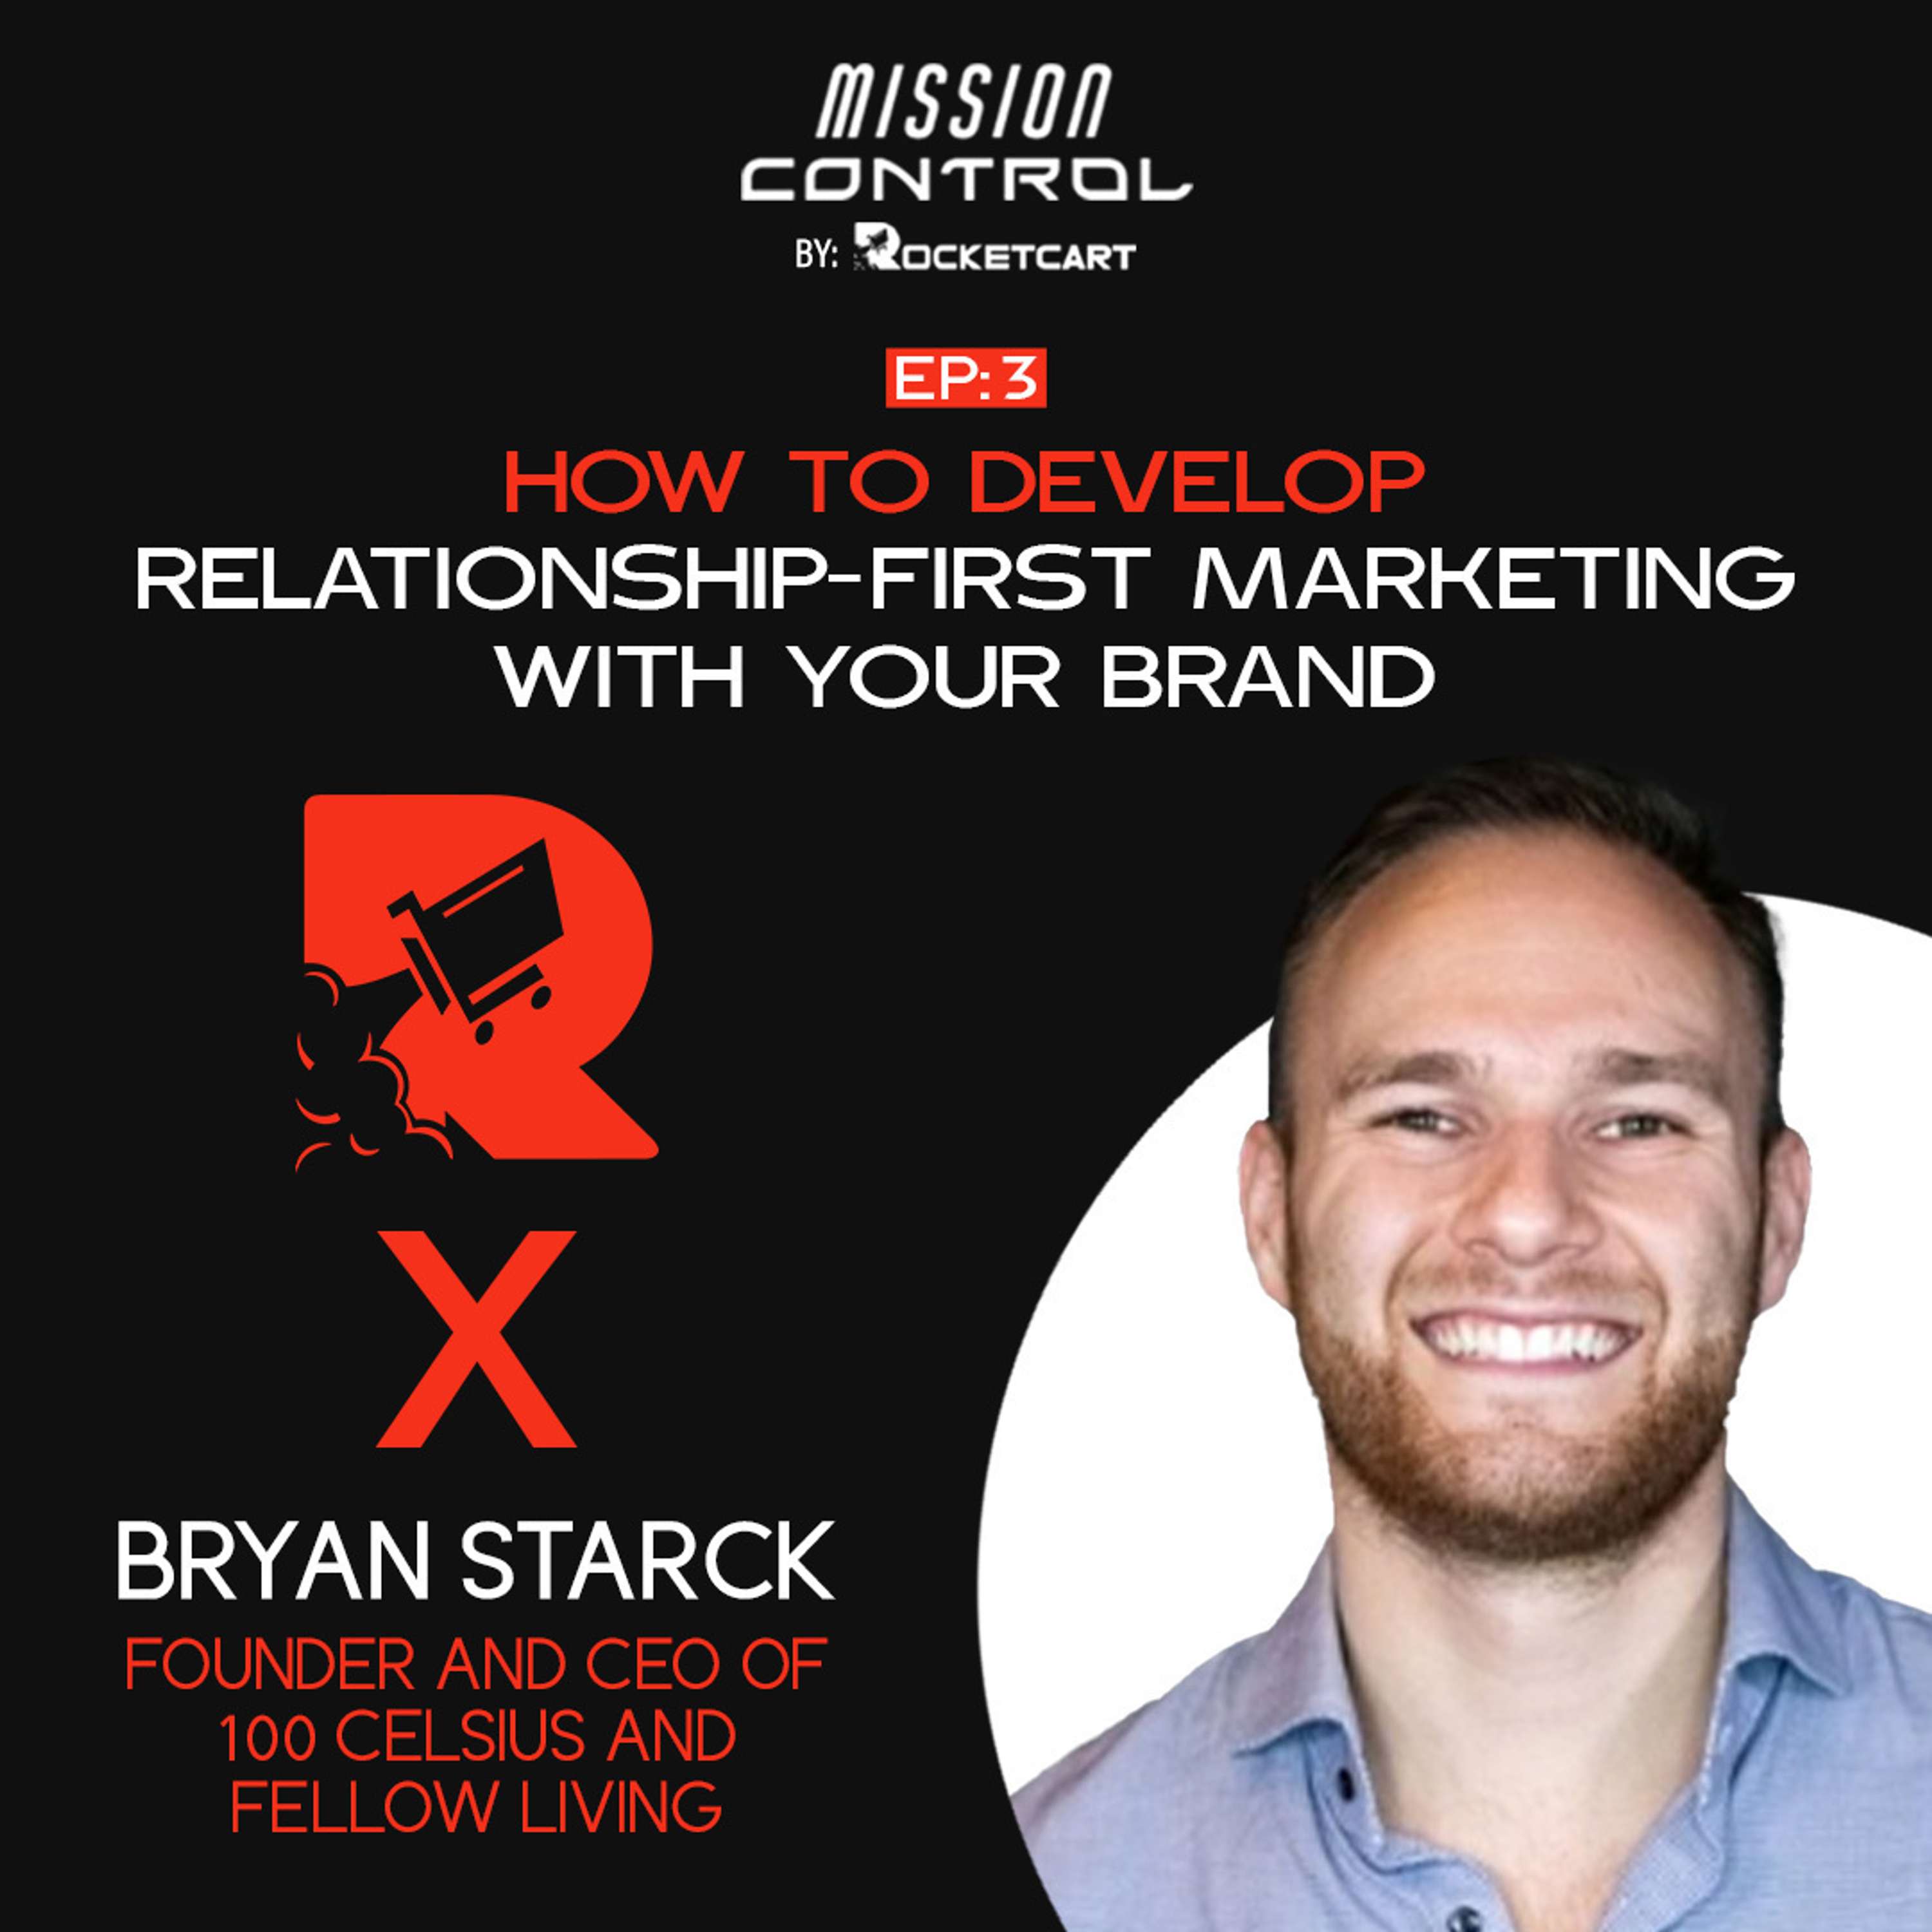 How to Develop Relationship-First Marketing with Your Brand